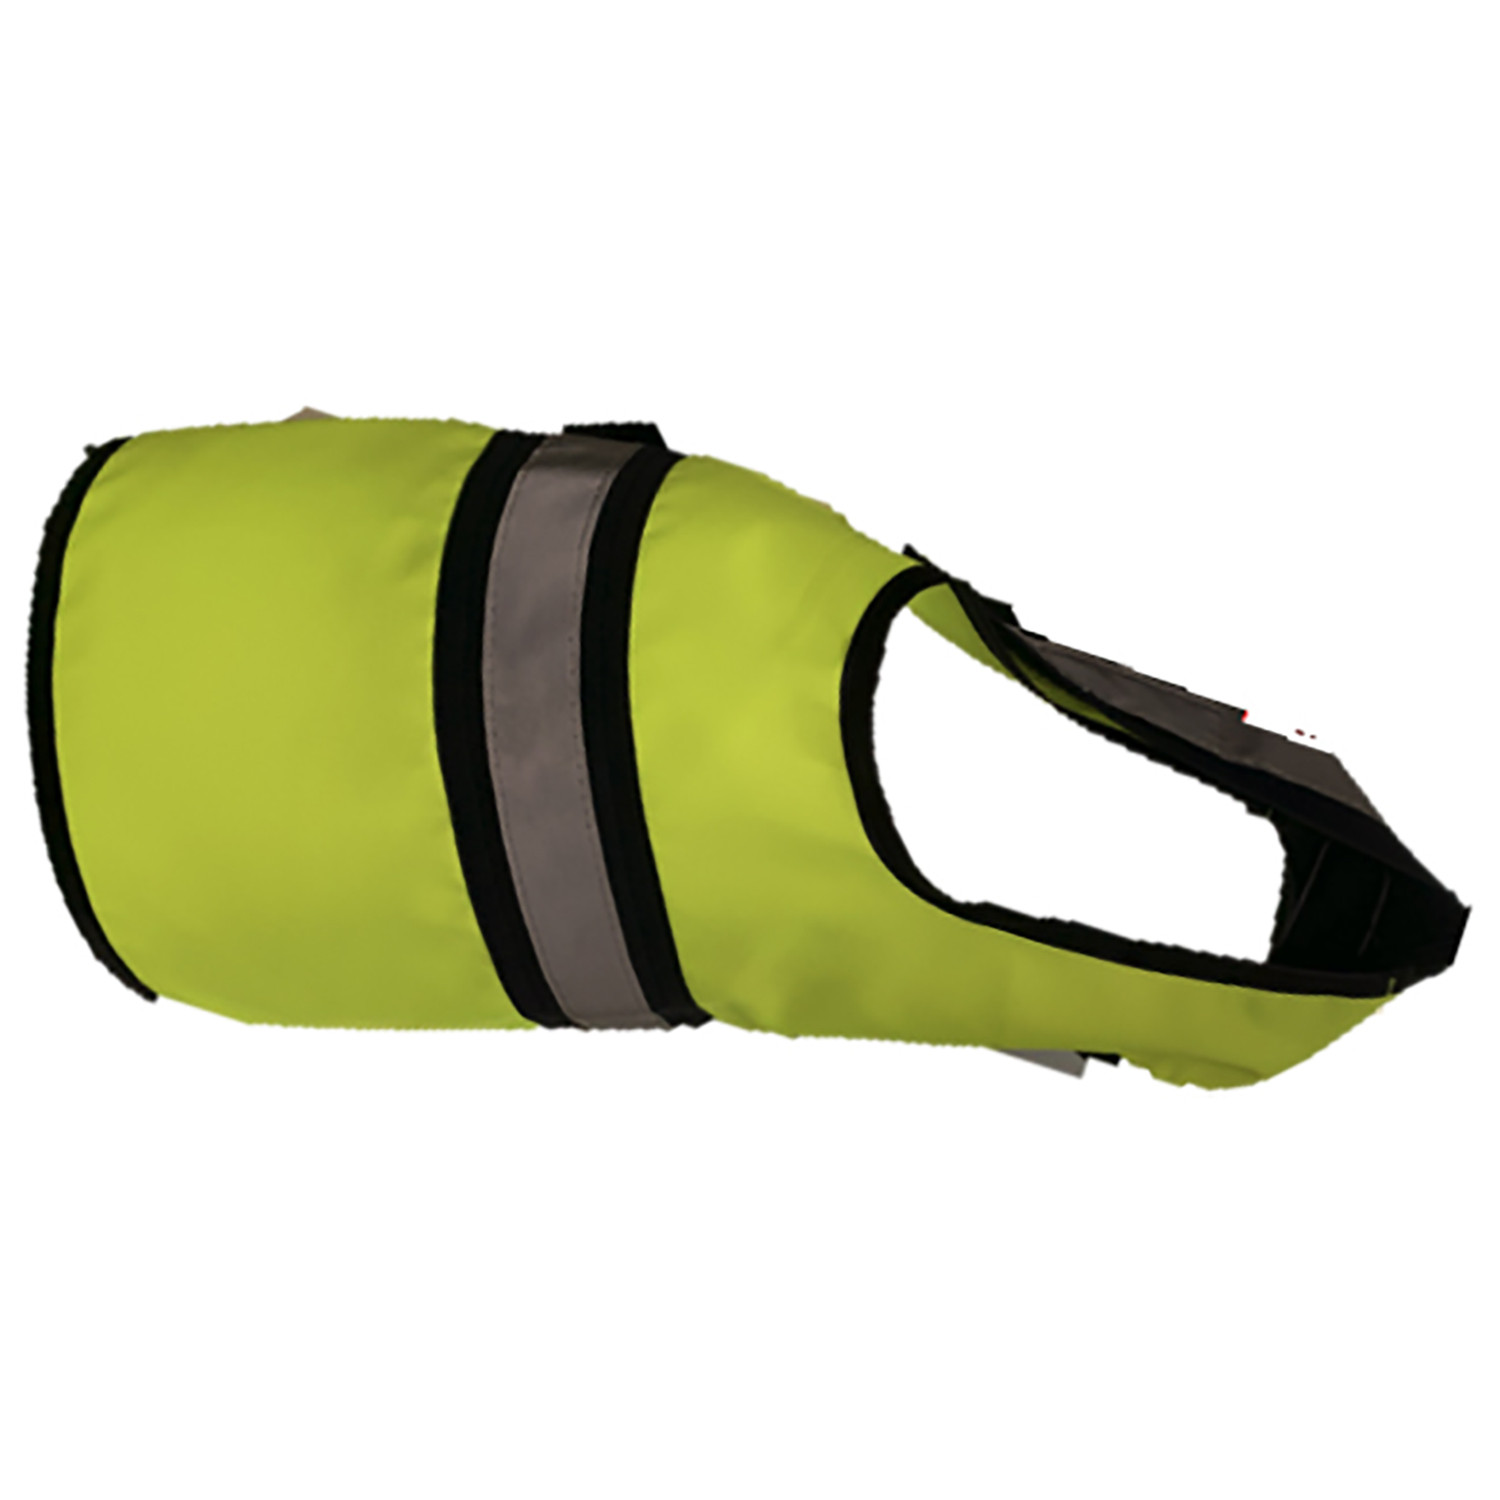 Lightweight High Visibility Gilet - S Image 1